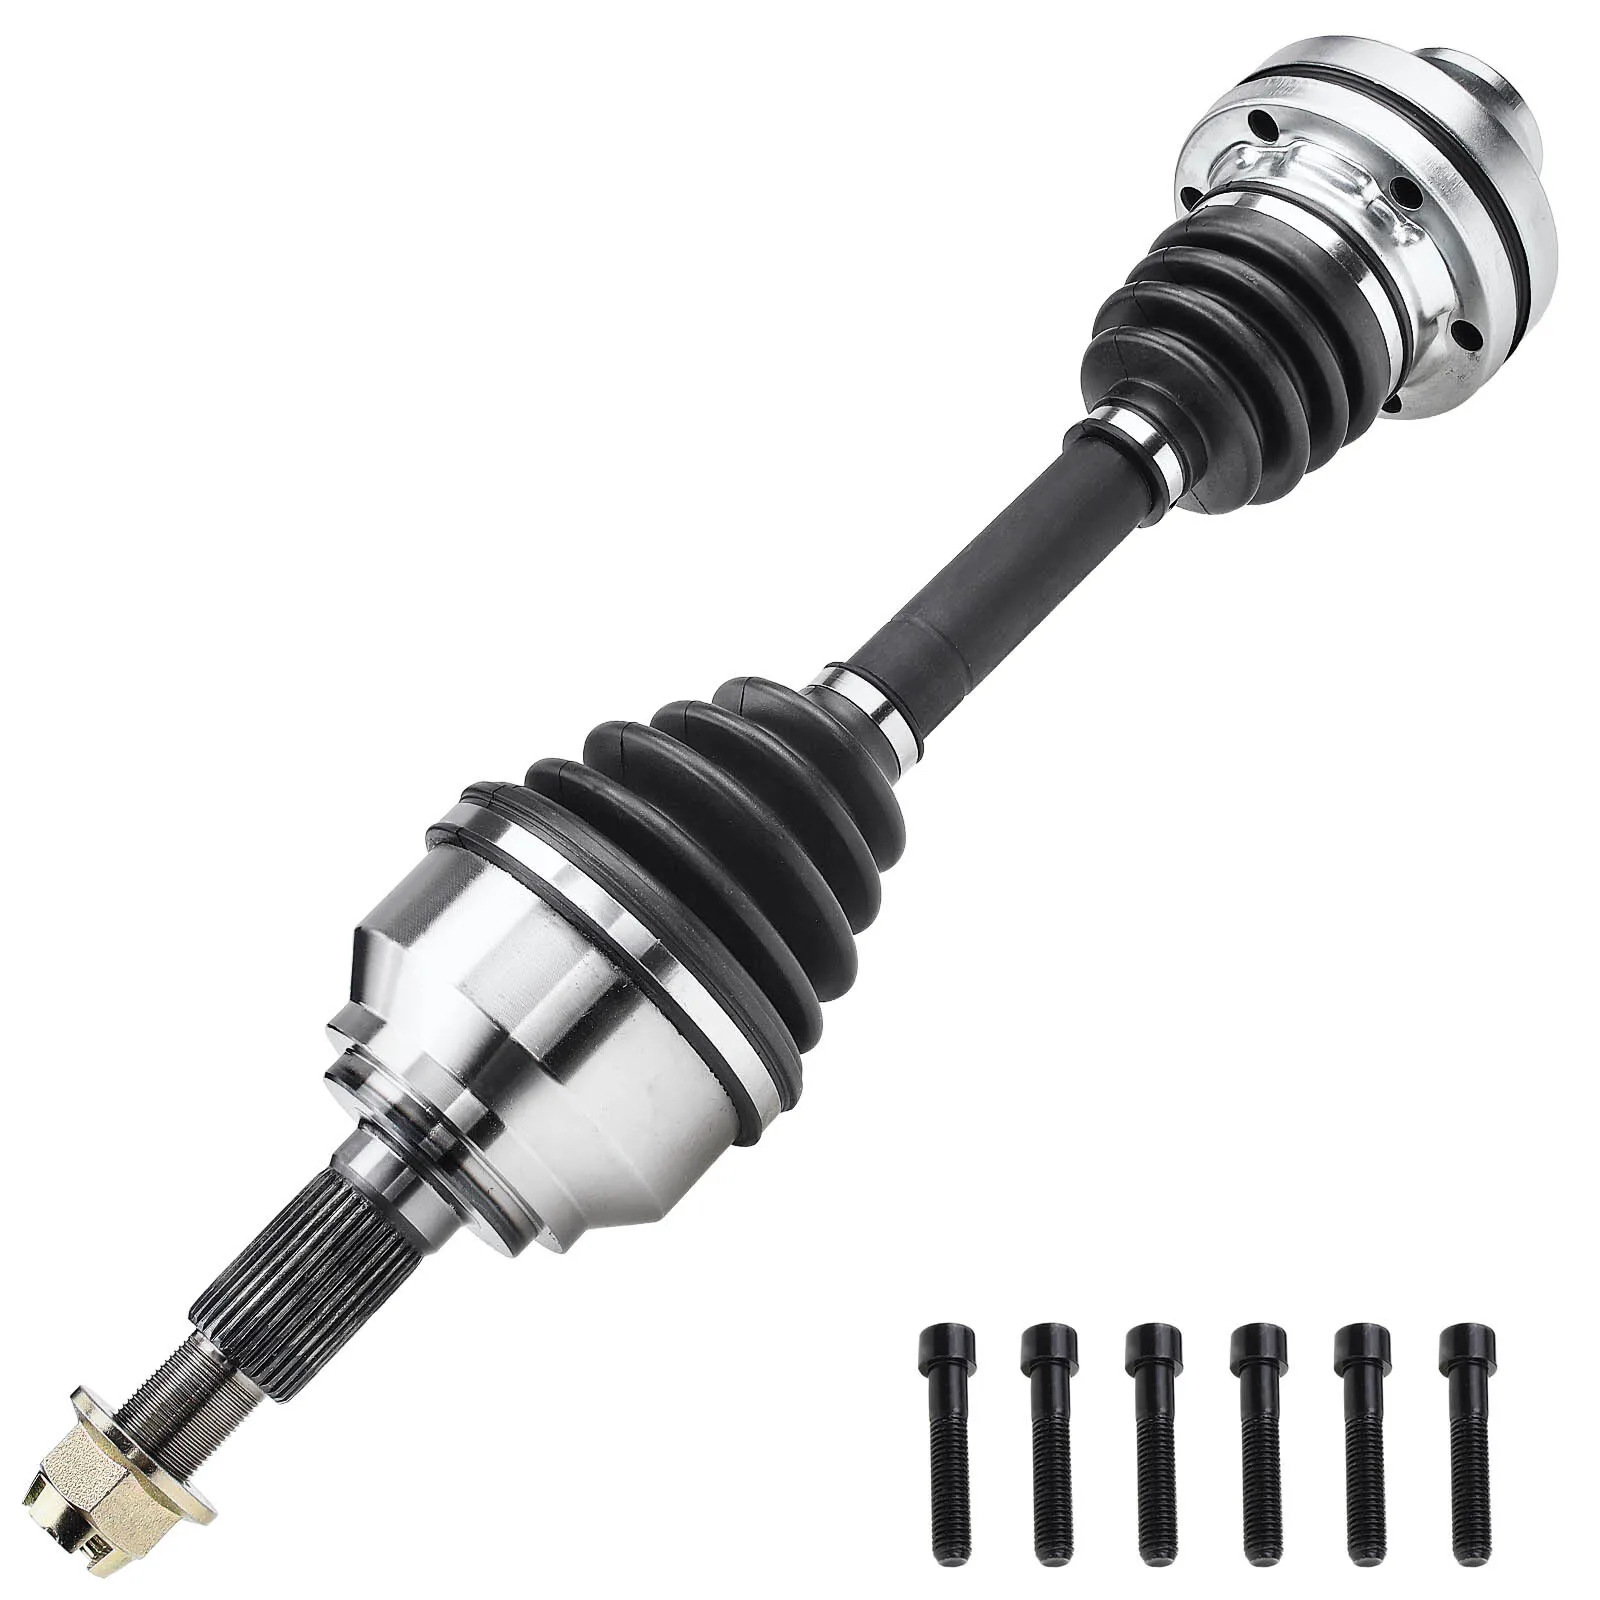 

In-stock CN US CV Axle Shaft Assembly for Audi Q7 2007-2010 Porsche Cayenne VW Touareg Front 7L0407271A